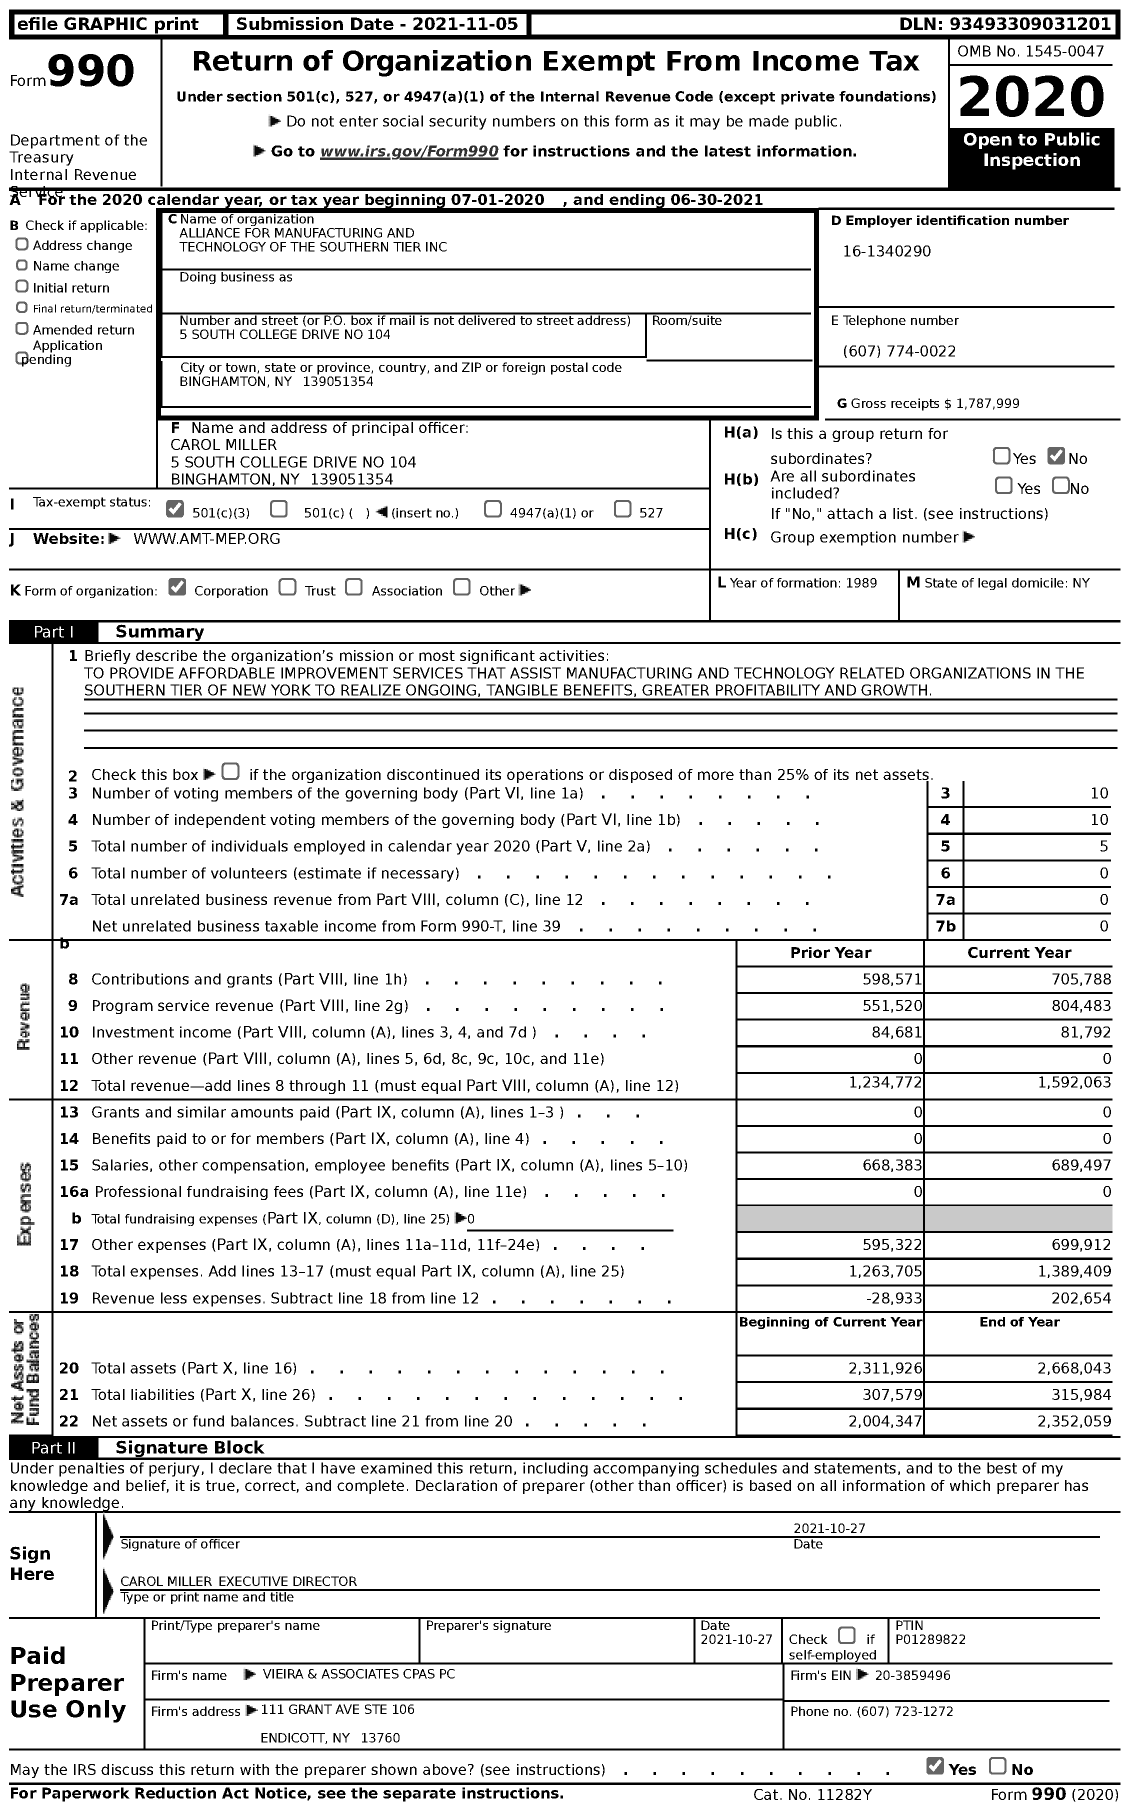 Image of first page of 2020 Form 990 for Alliance for Manufacturing and Technology of the Southern Tier (AMT)